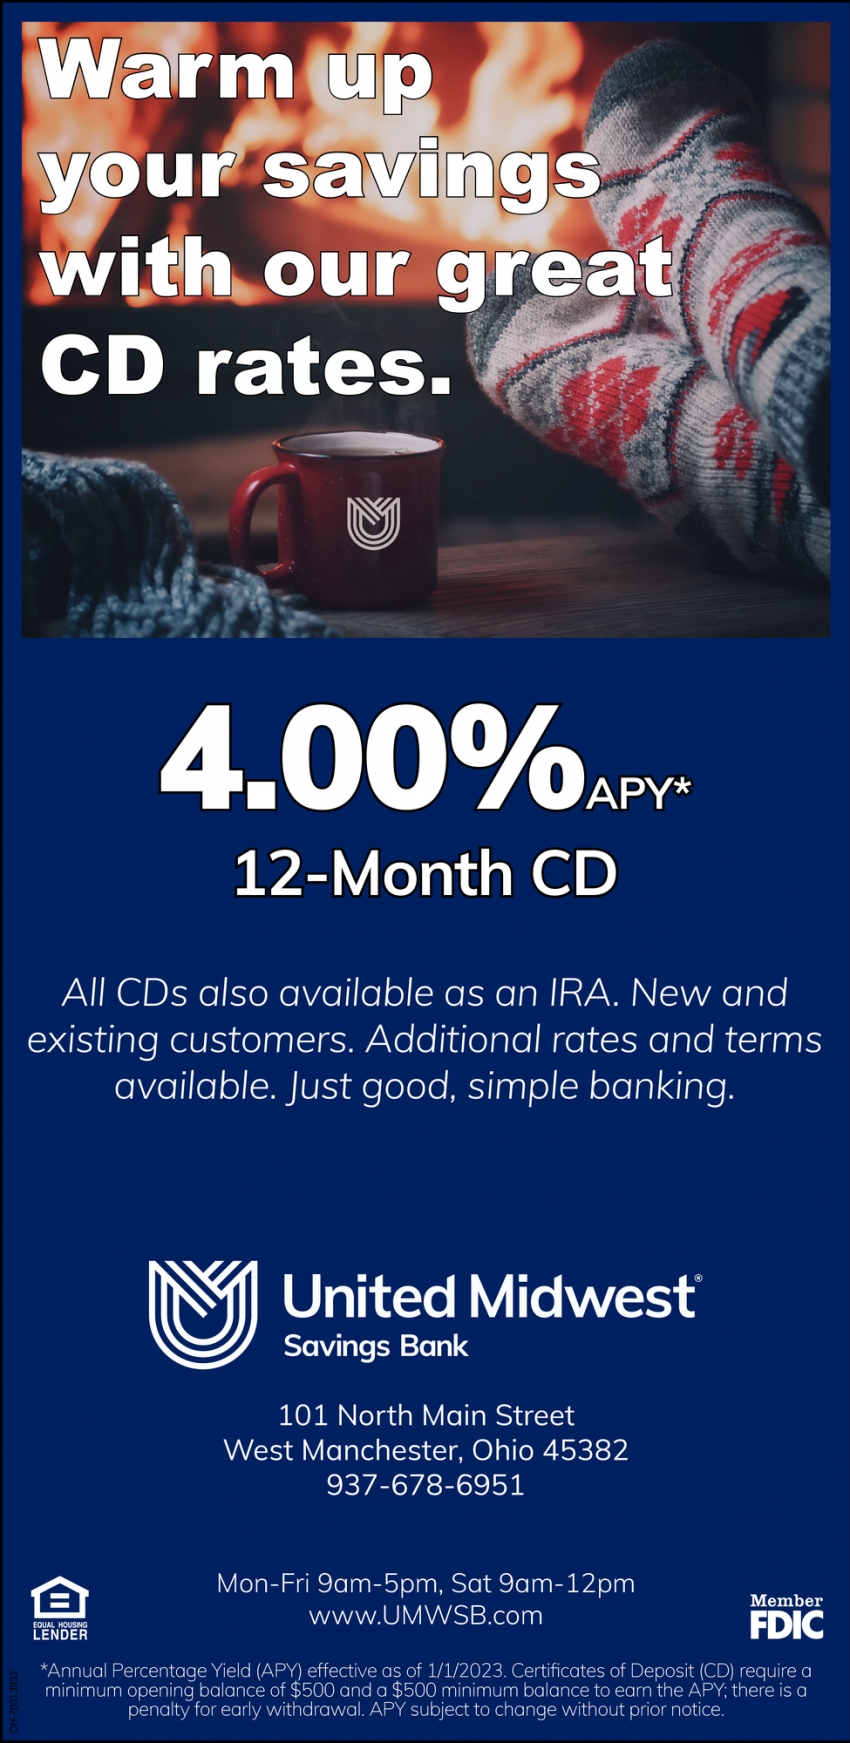 Warm Up Your Savings With Our Great CD Rates